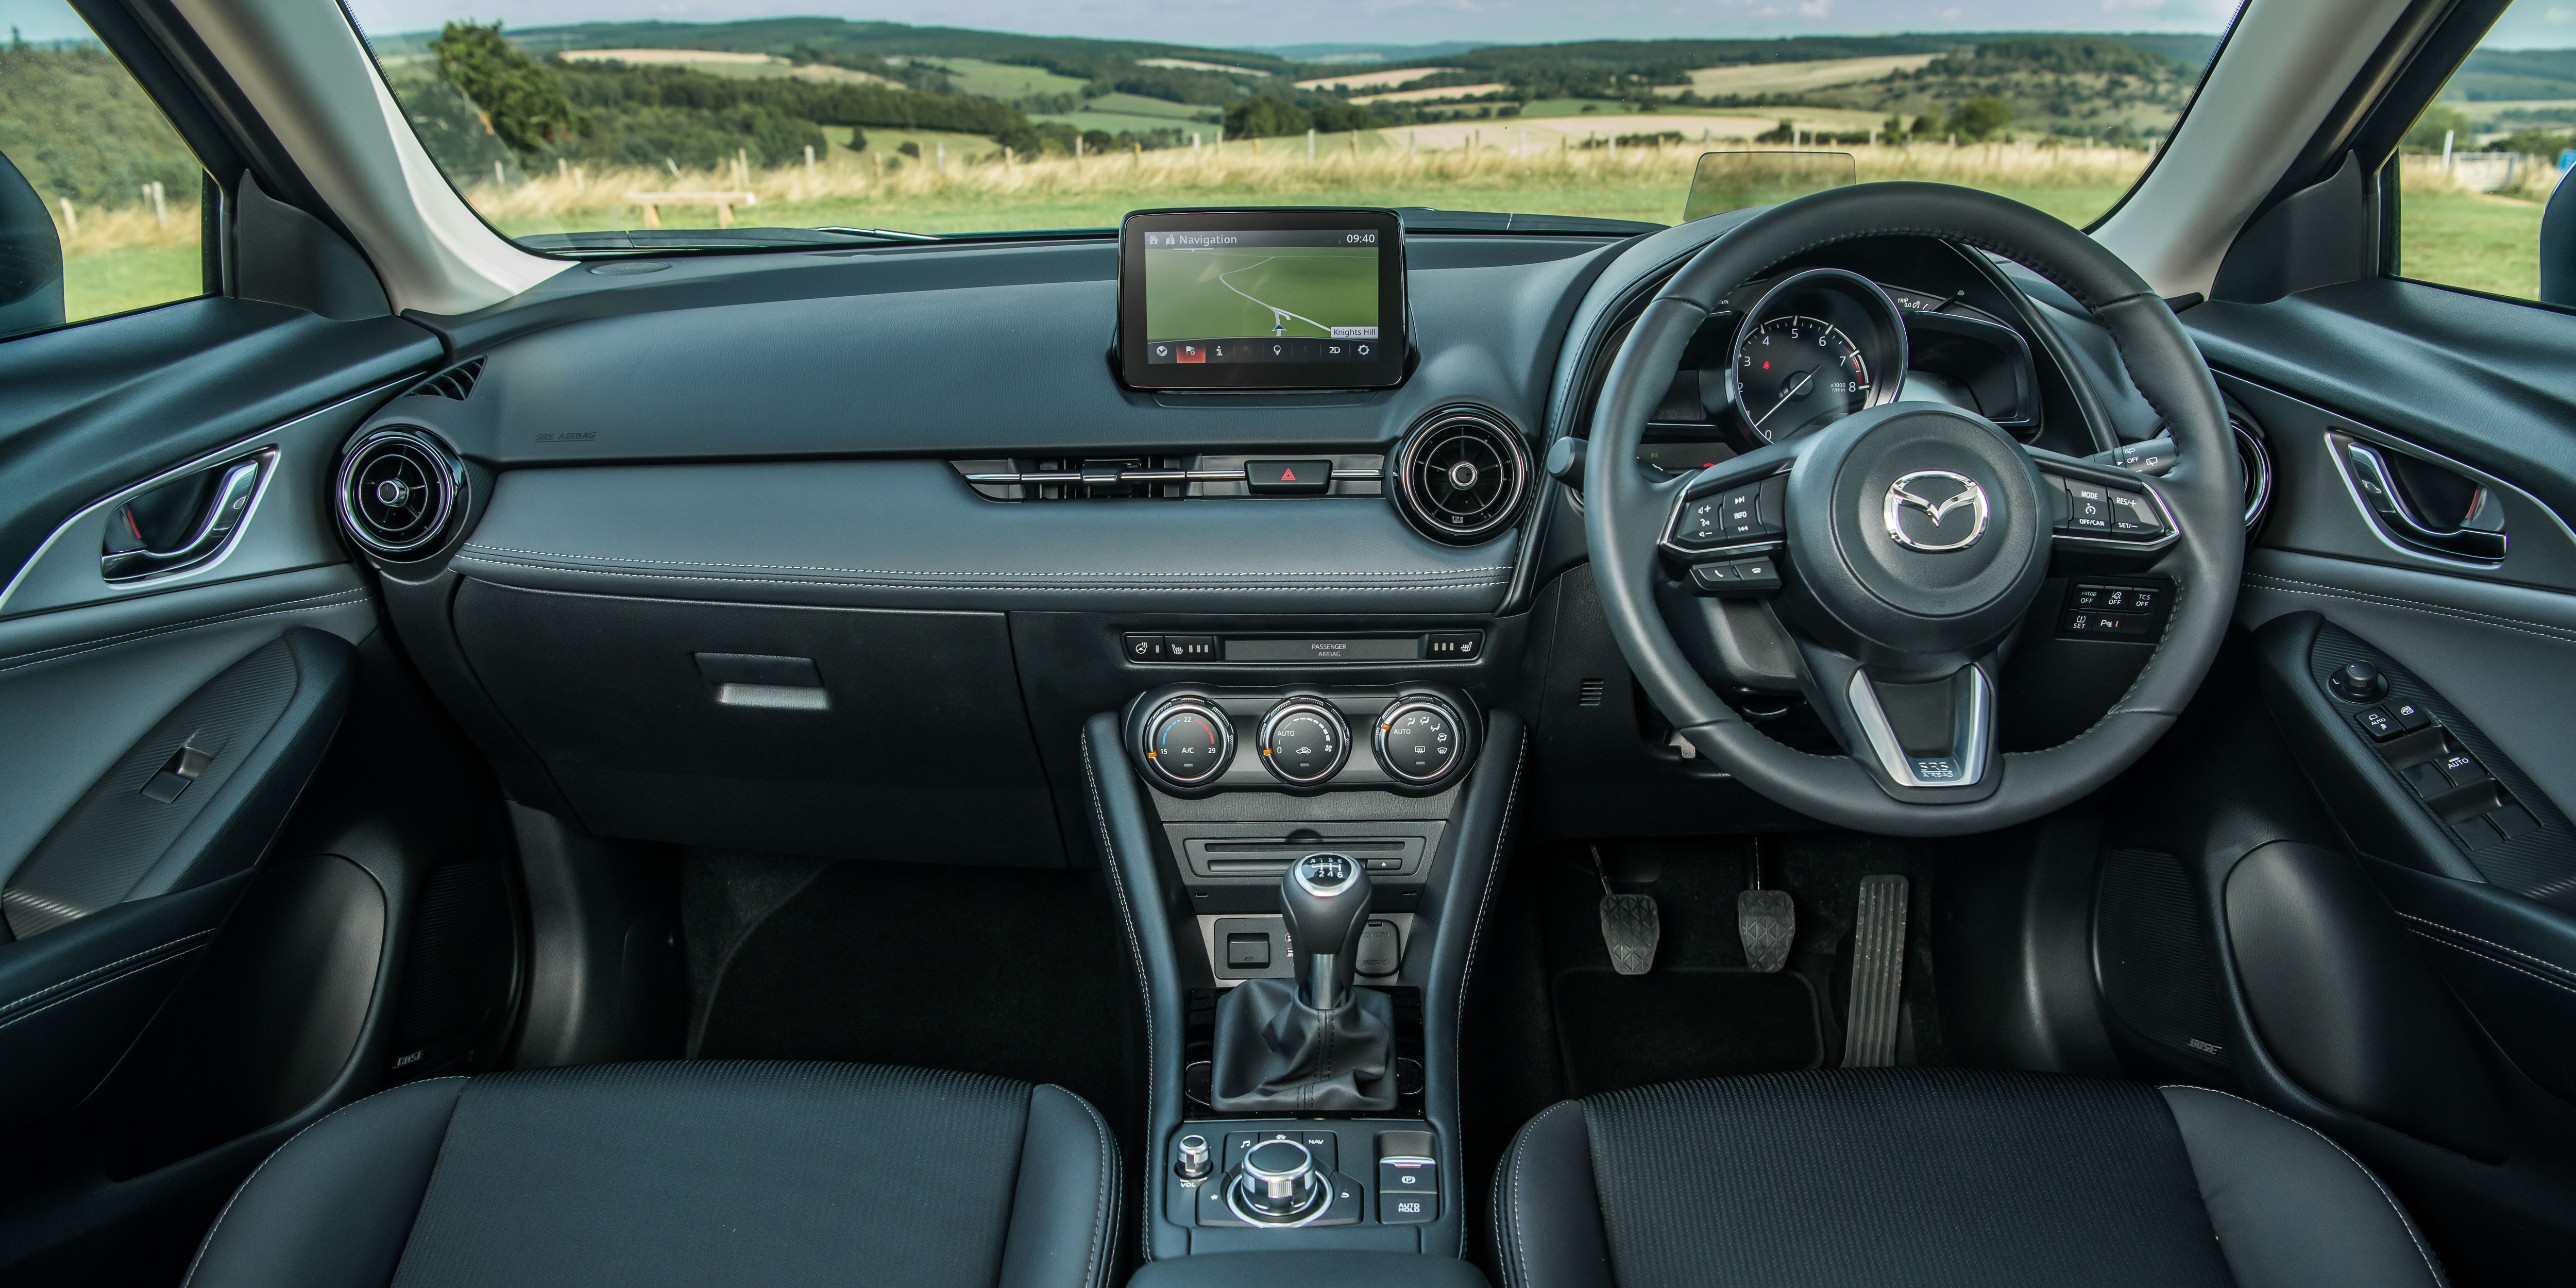 The CX-3's cabin is easy to use, but the plastics feel a bit cheap in places